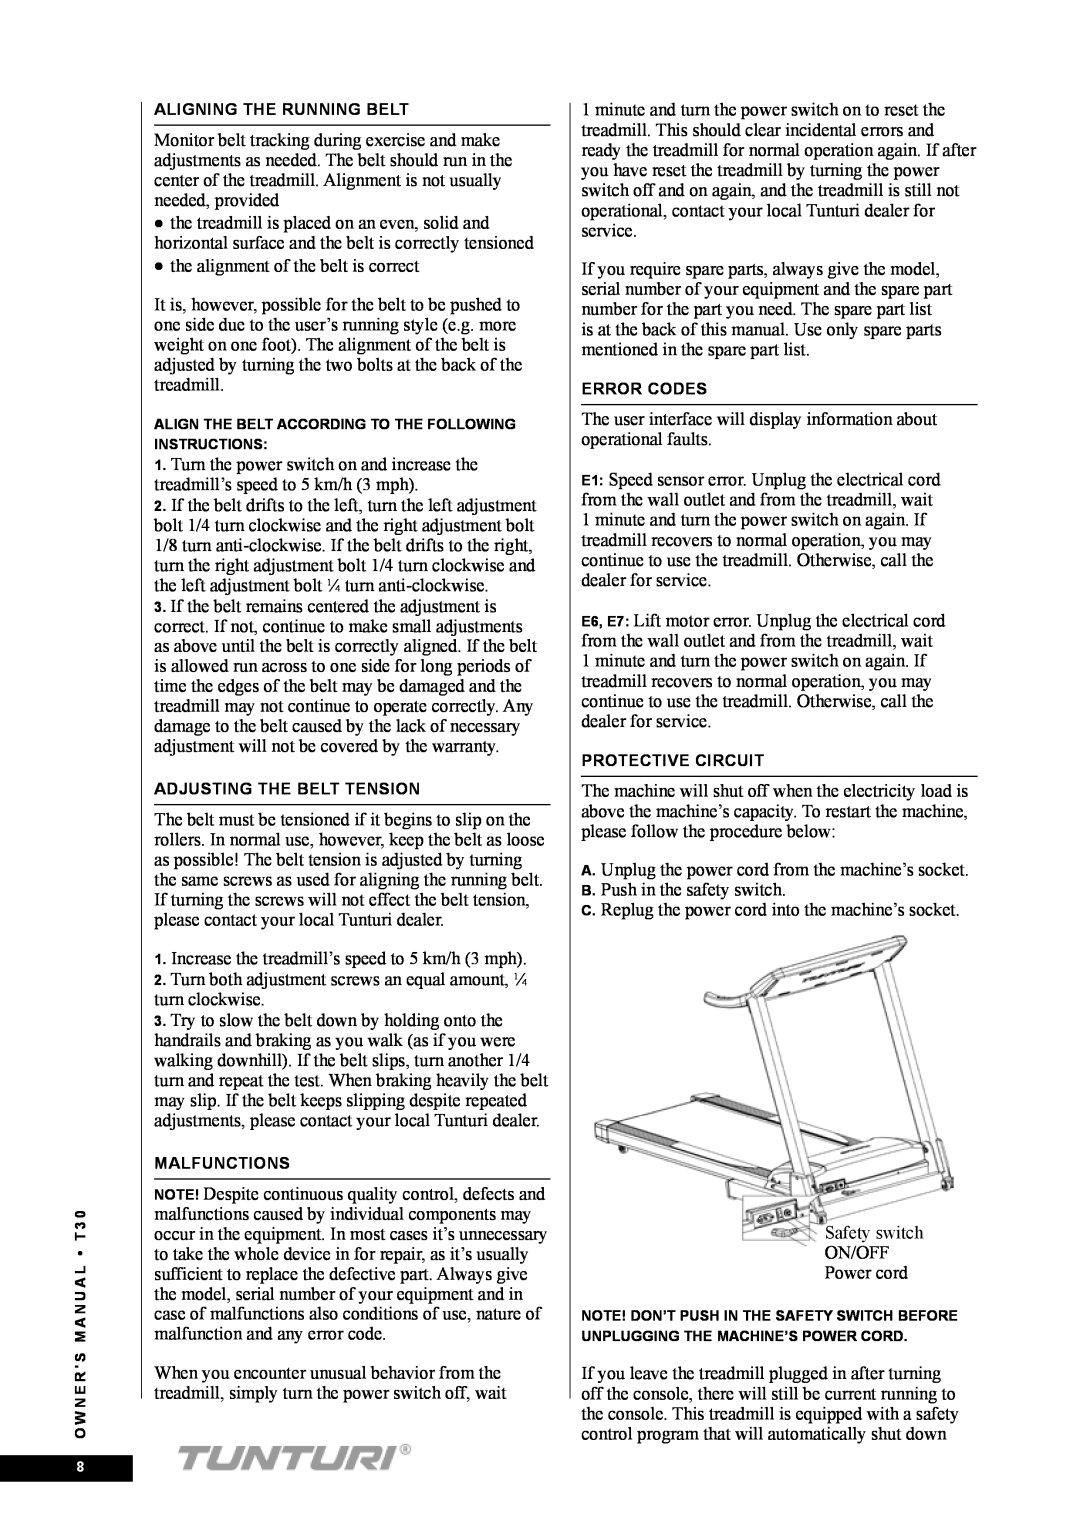 Tunturi T30 owner manual •the alignment of the belt is correct 